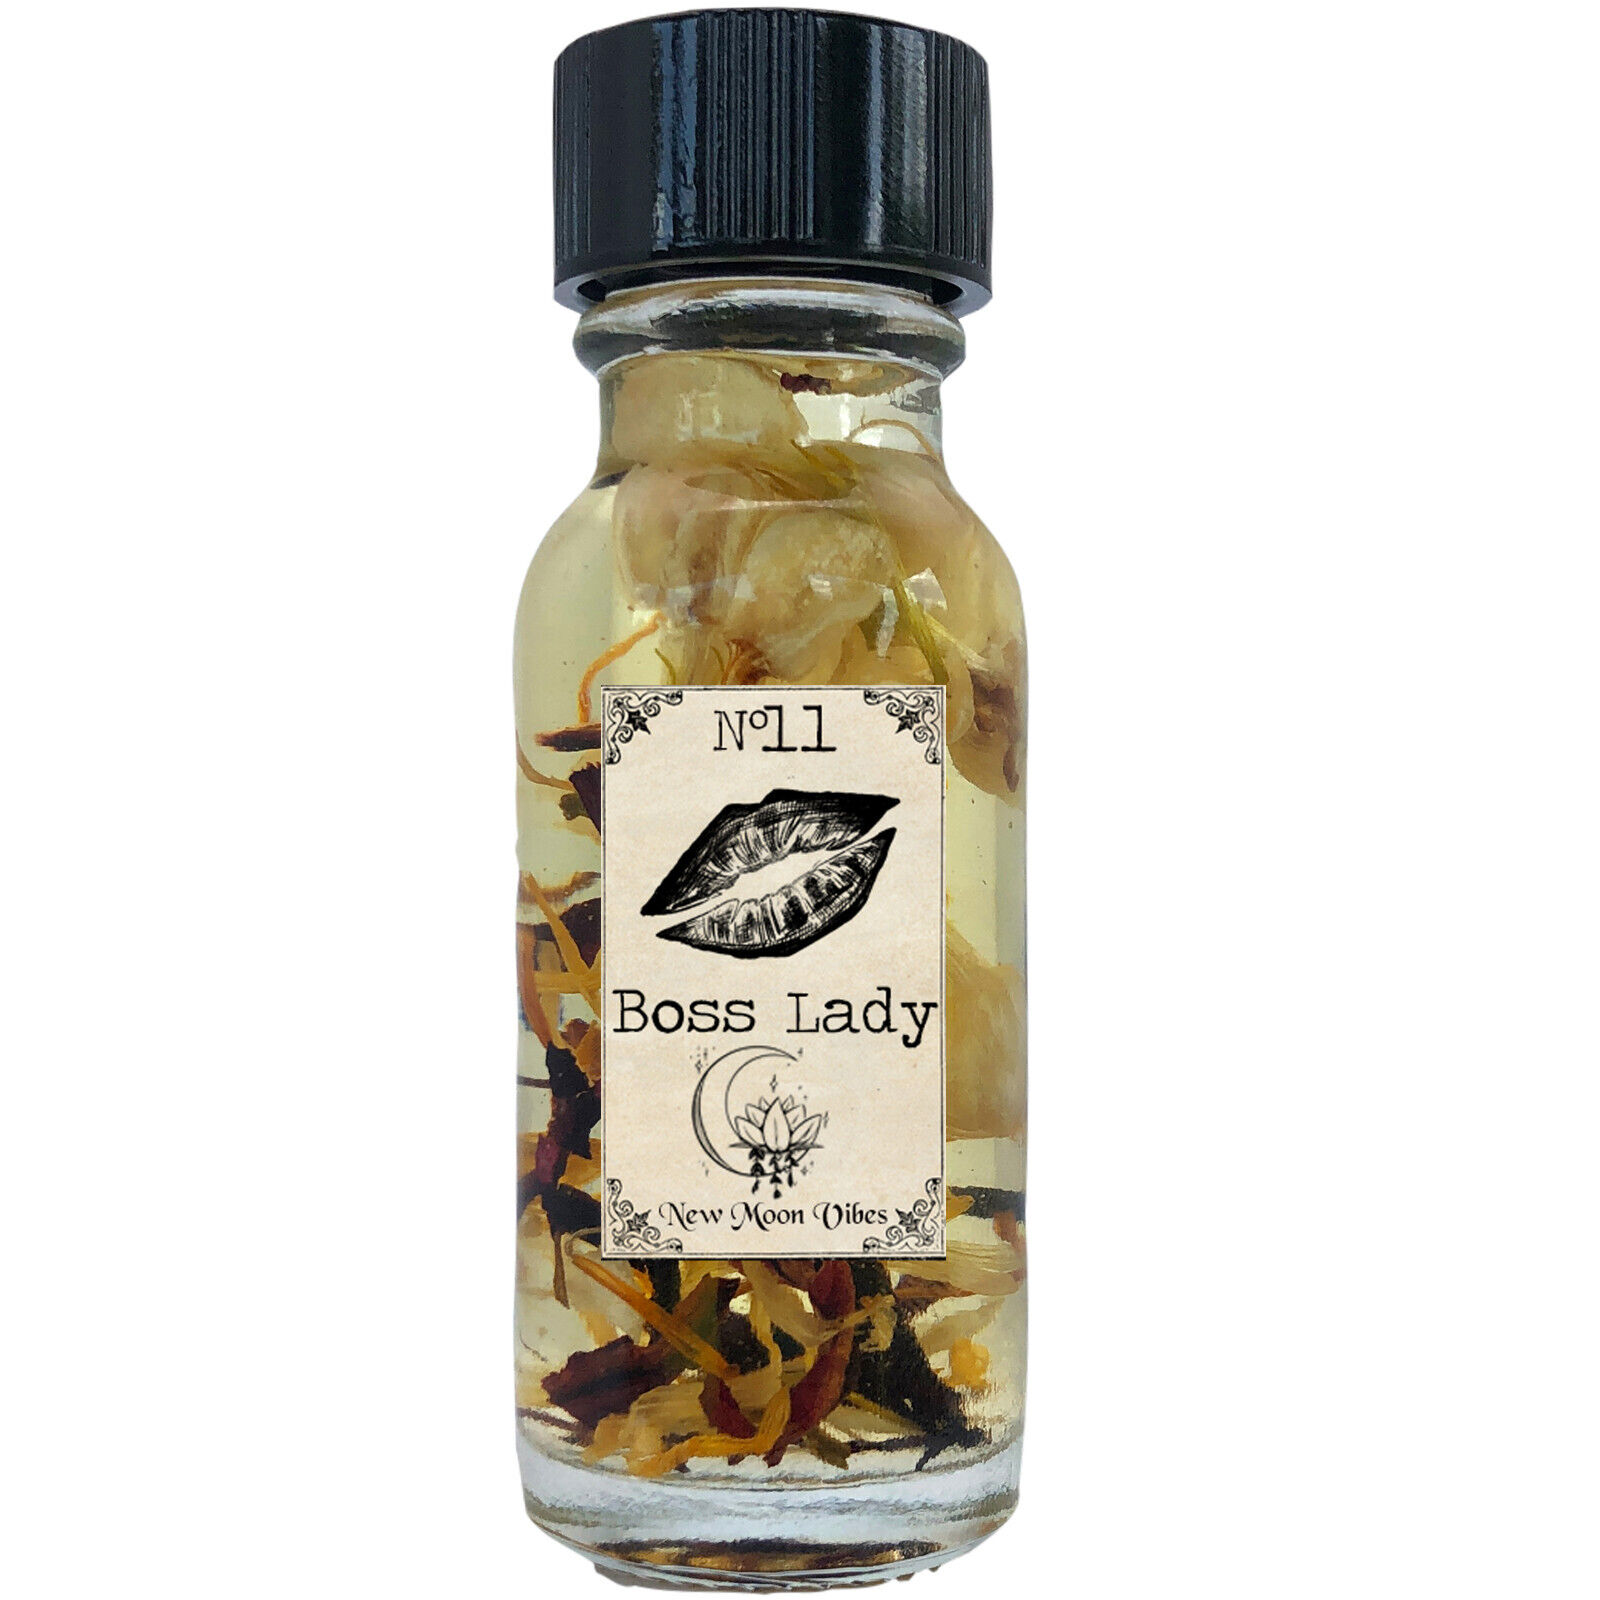 Boss Lady Conjure Oil Wicca Pagan Intention Spell Power Courage Goals Dreams